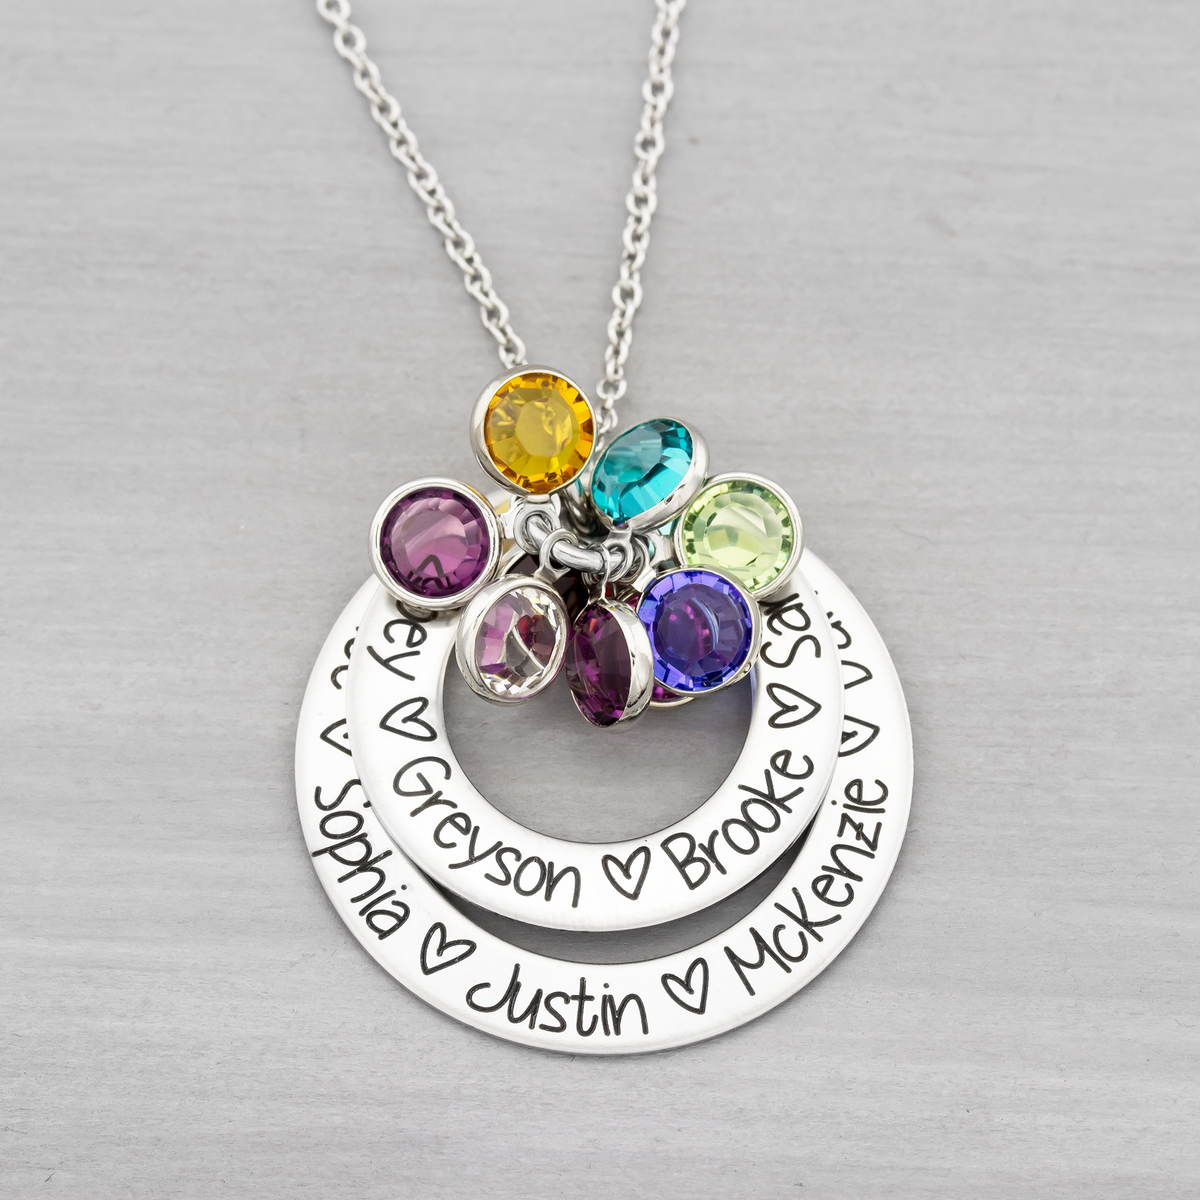 Double Layer Birthstone Name Necklace for Mom or Grandmother - Heartfelt Tokens